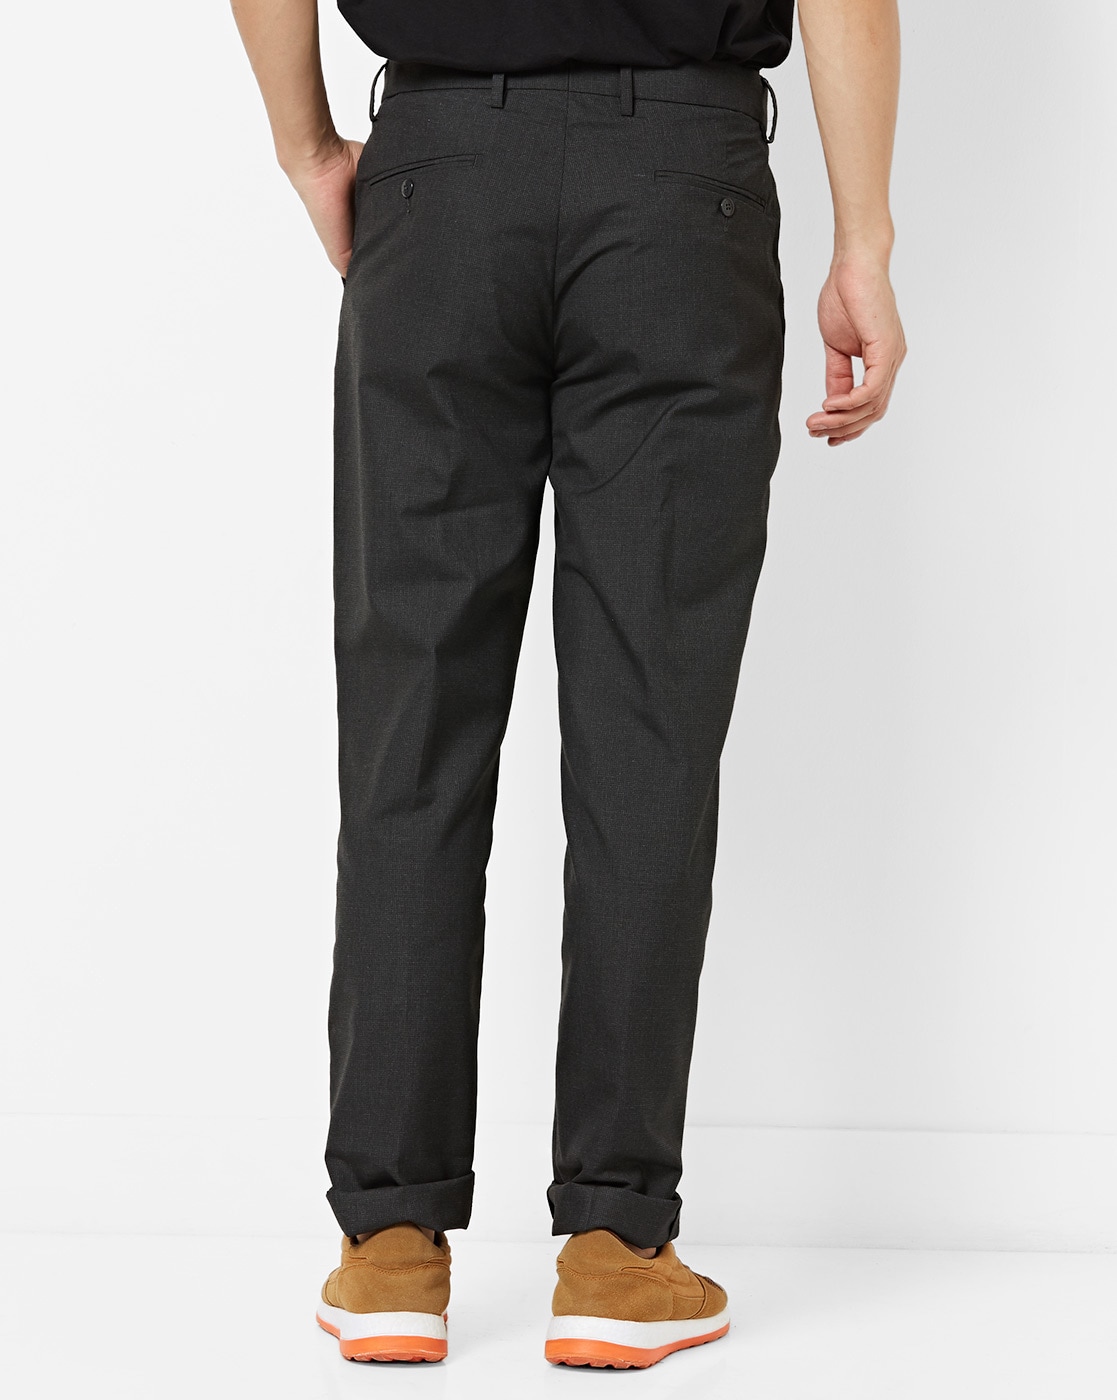 Peter England Trousers  Chinos Peter England Grey Formal Trousers for Men  at Peterenglandcom